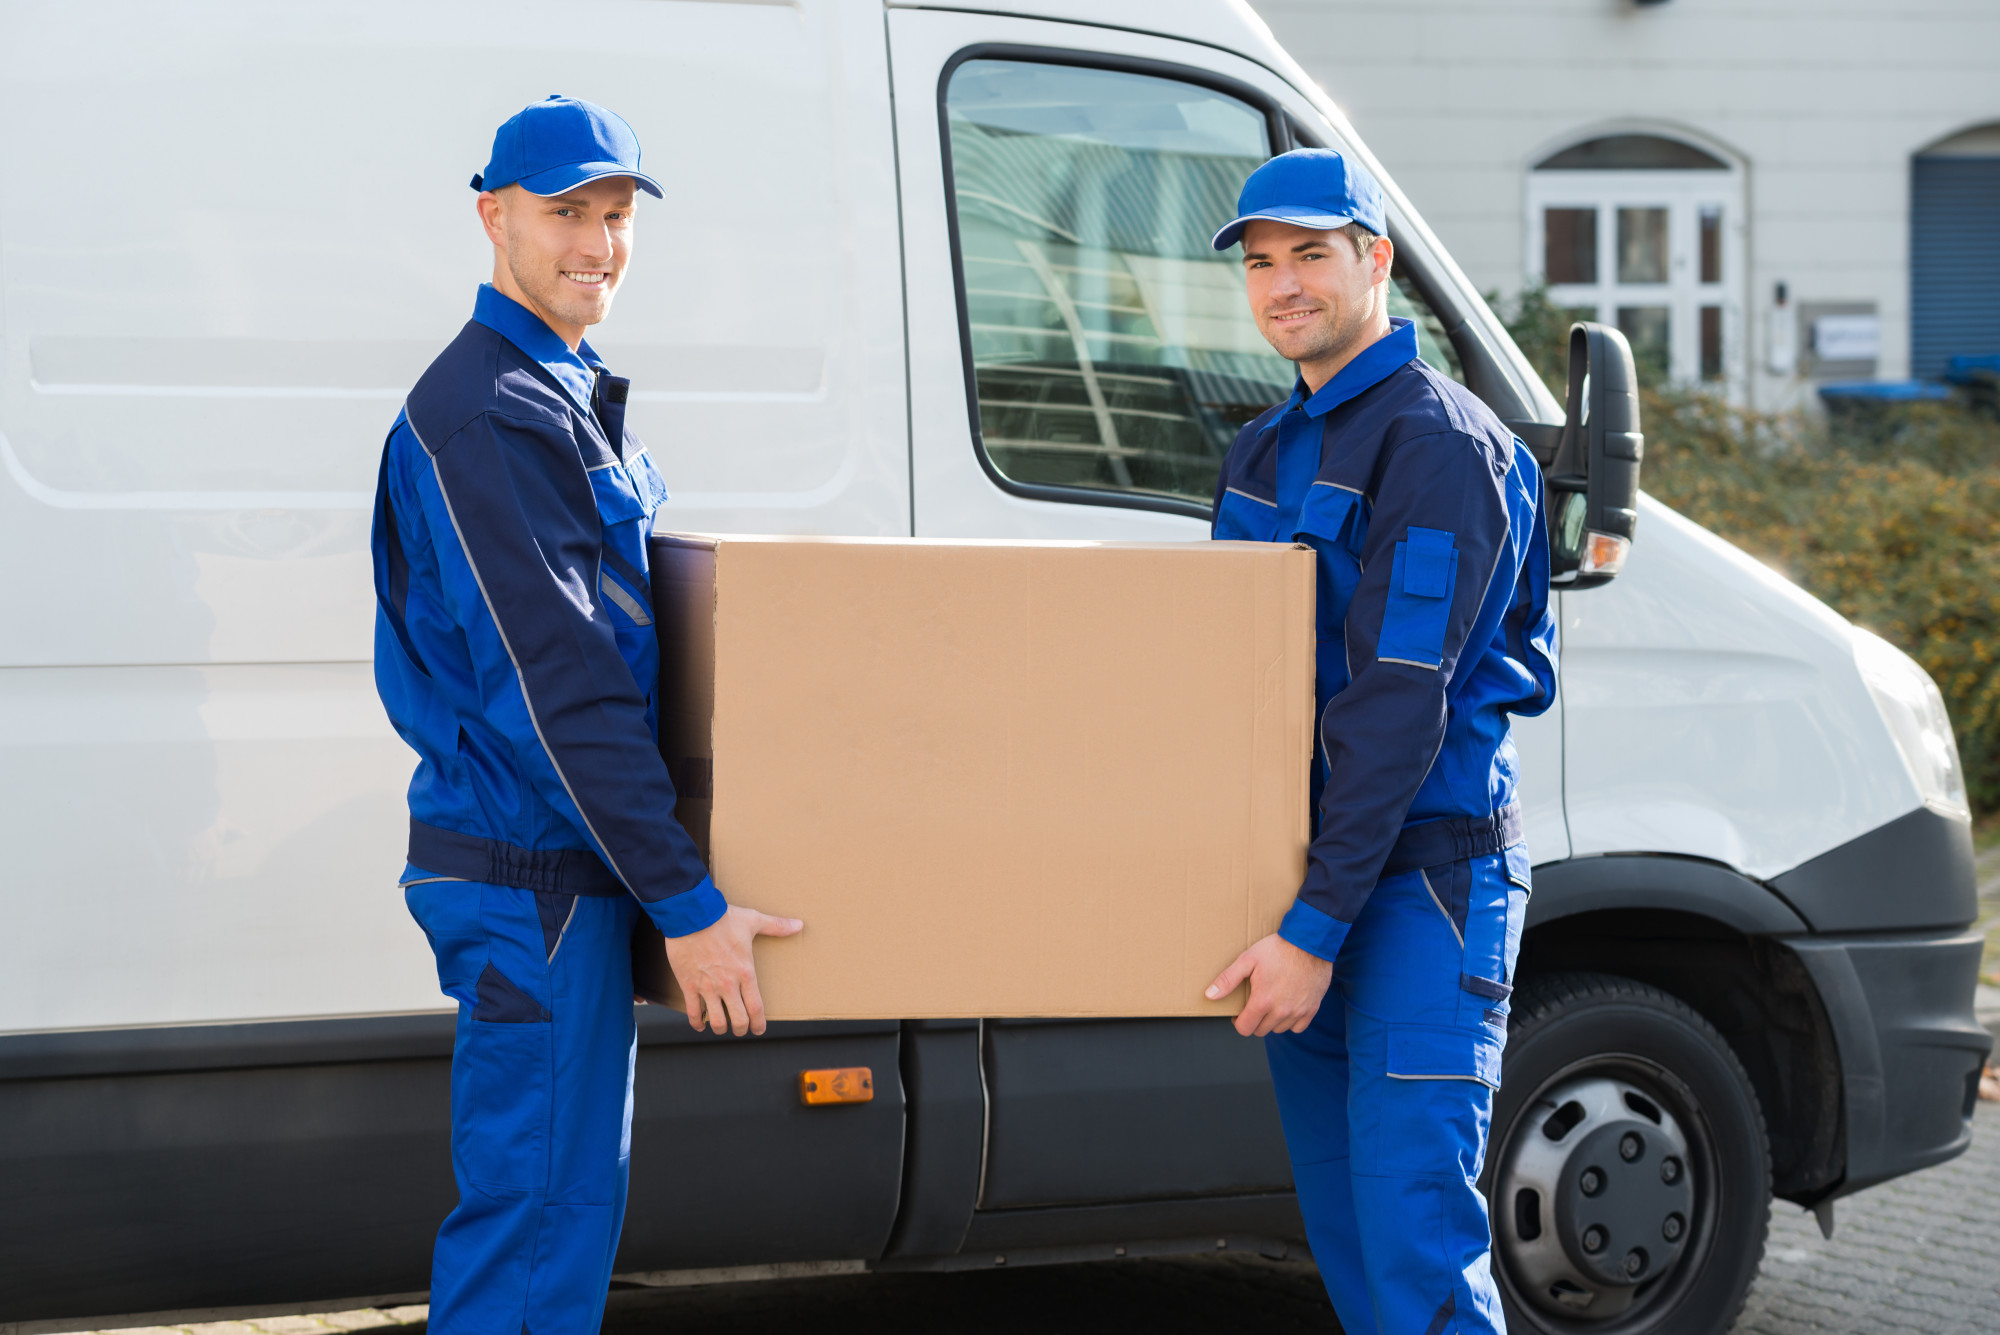 Local Leads for Movers: 6 Tips to Increase Local Business